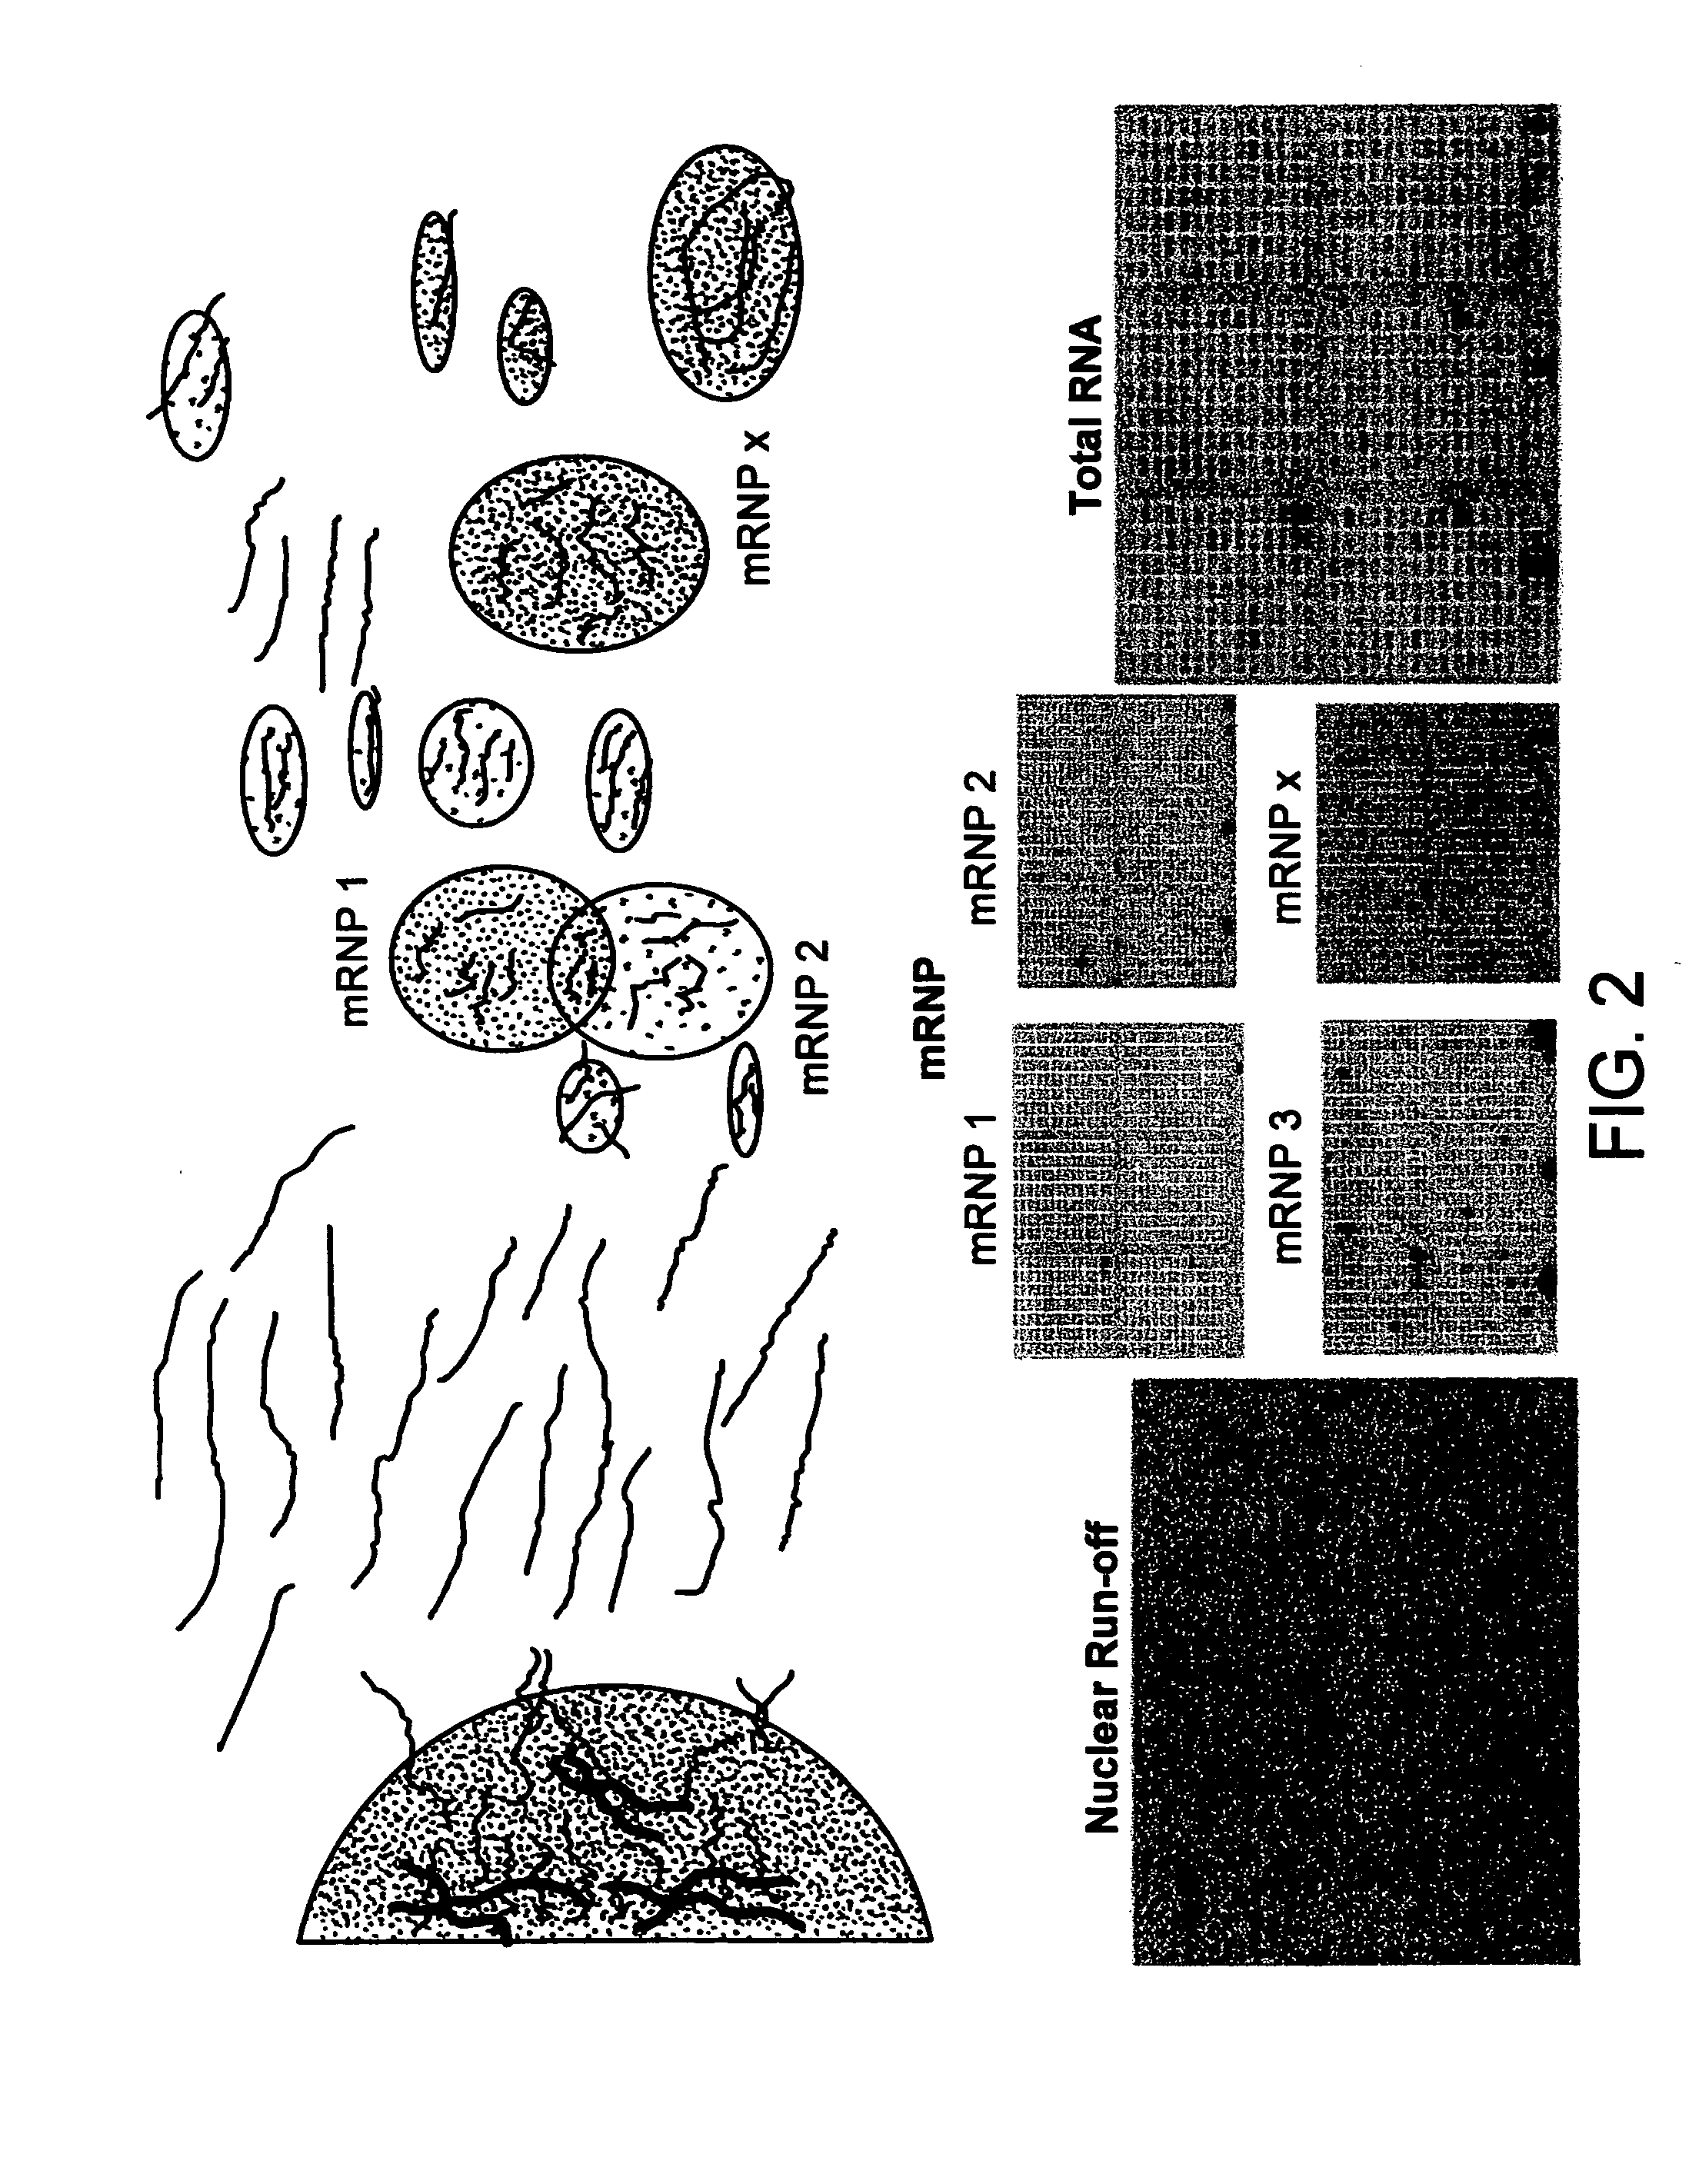 Methods for isolating and characterizing endogenous mRNA-protein (mRNP) complexes